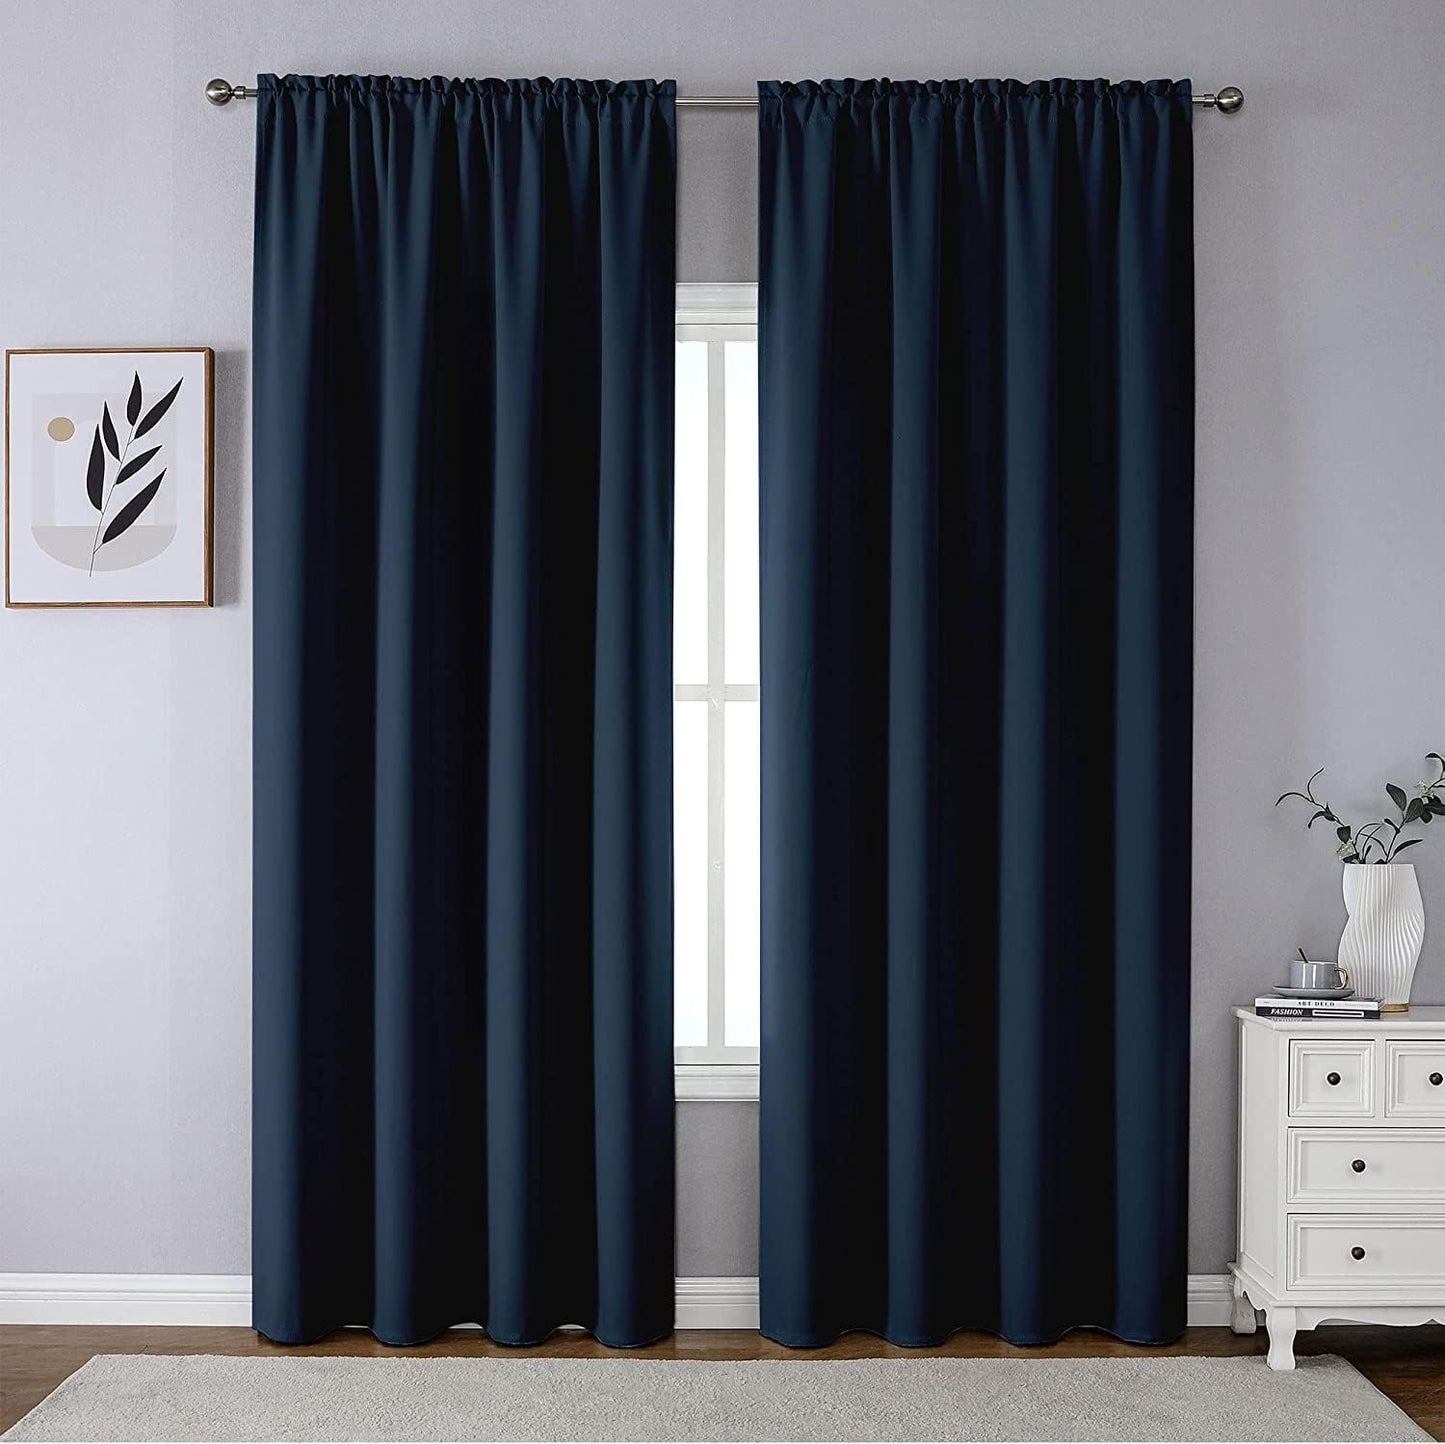 CUCRAF Blackout Curtains 84 Inches Long for Living Room, Light Beige Room Darkening Window Curtain Panels, Rod Pocket Thermal Insulated Solid Drapes for Bedroom, 52X84 Inch, Set of 2 Panels  CUCRAF Navy Blue 52W X 90L Inch 2 Panels 